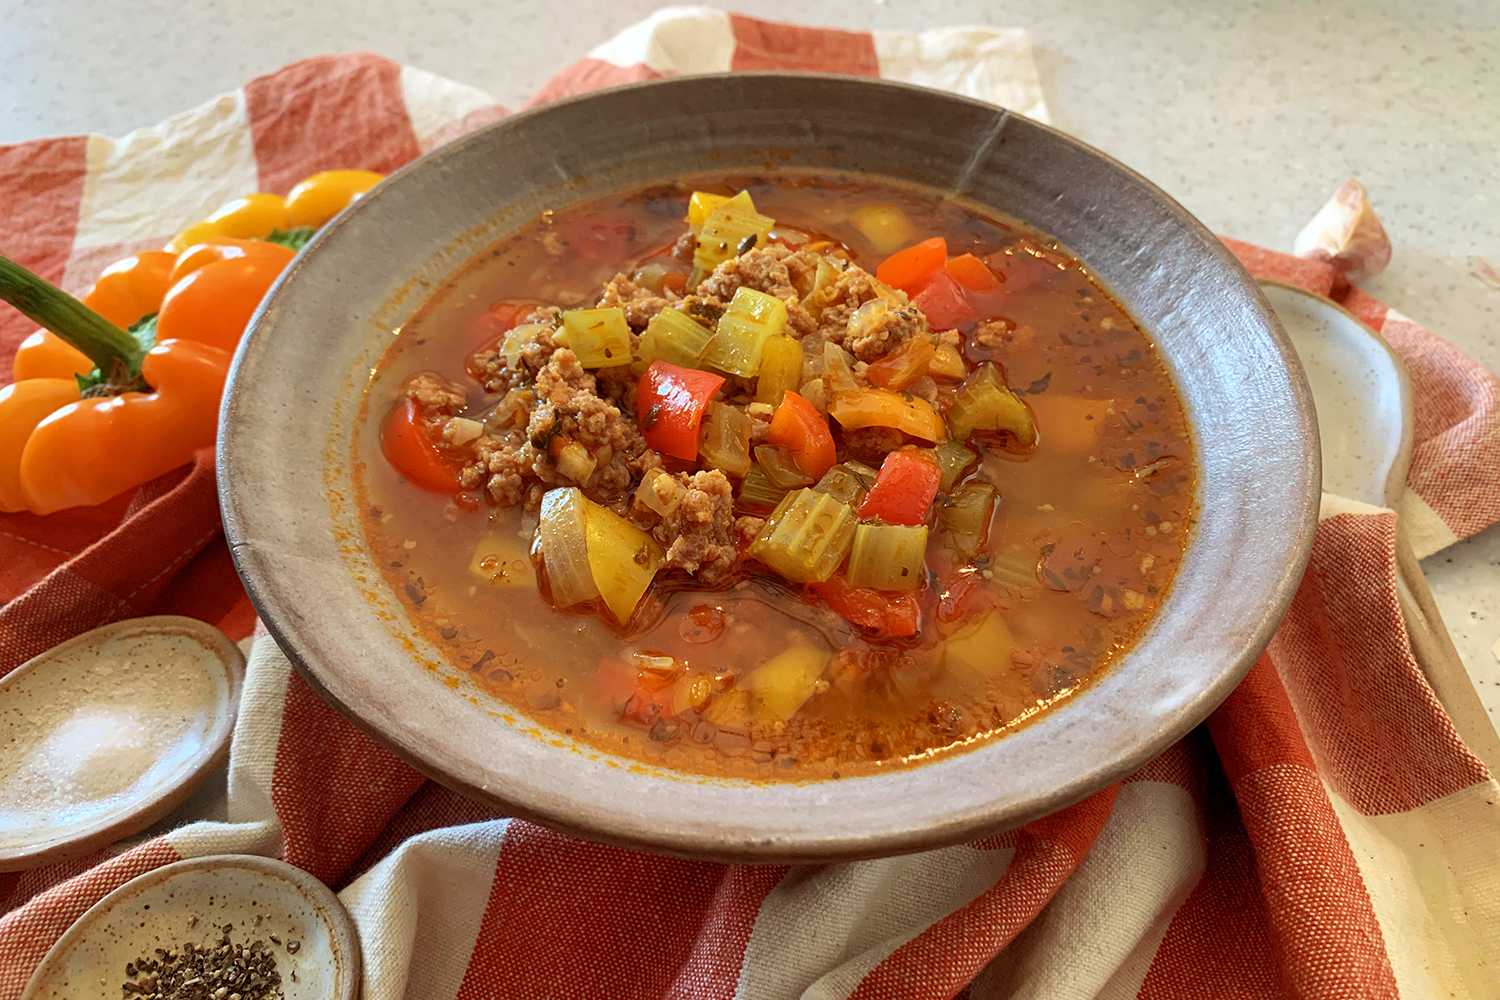 Red soup filled with ground beef, orange and red bell peppers, chopped onions and chopped celery